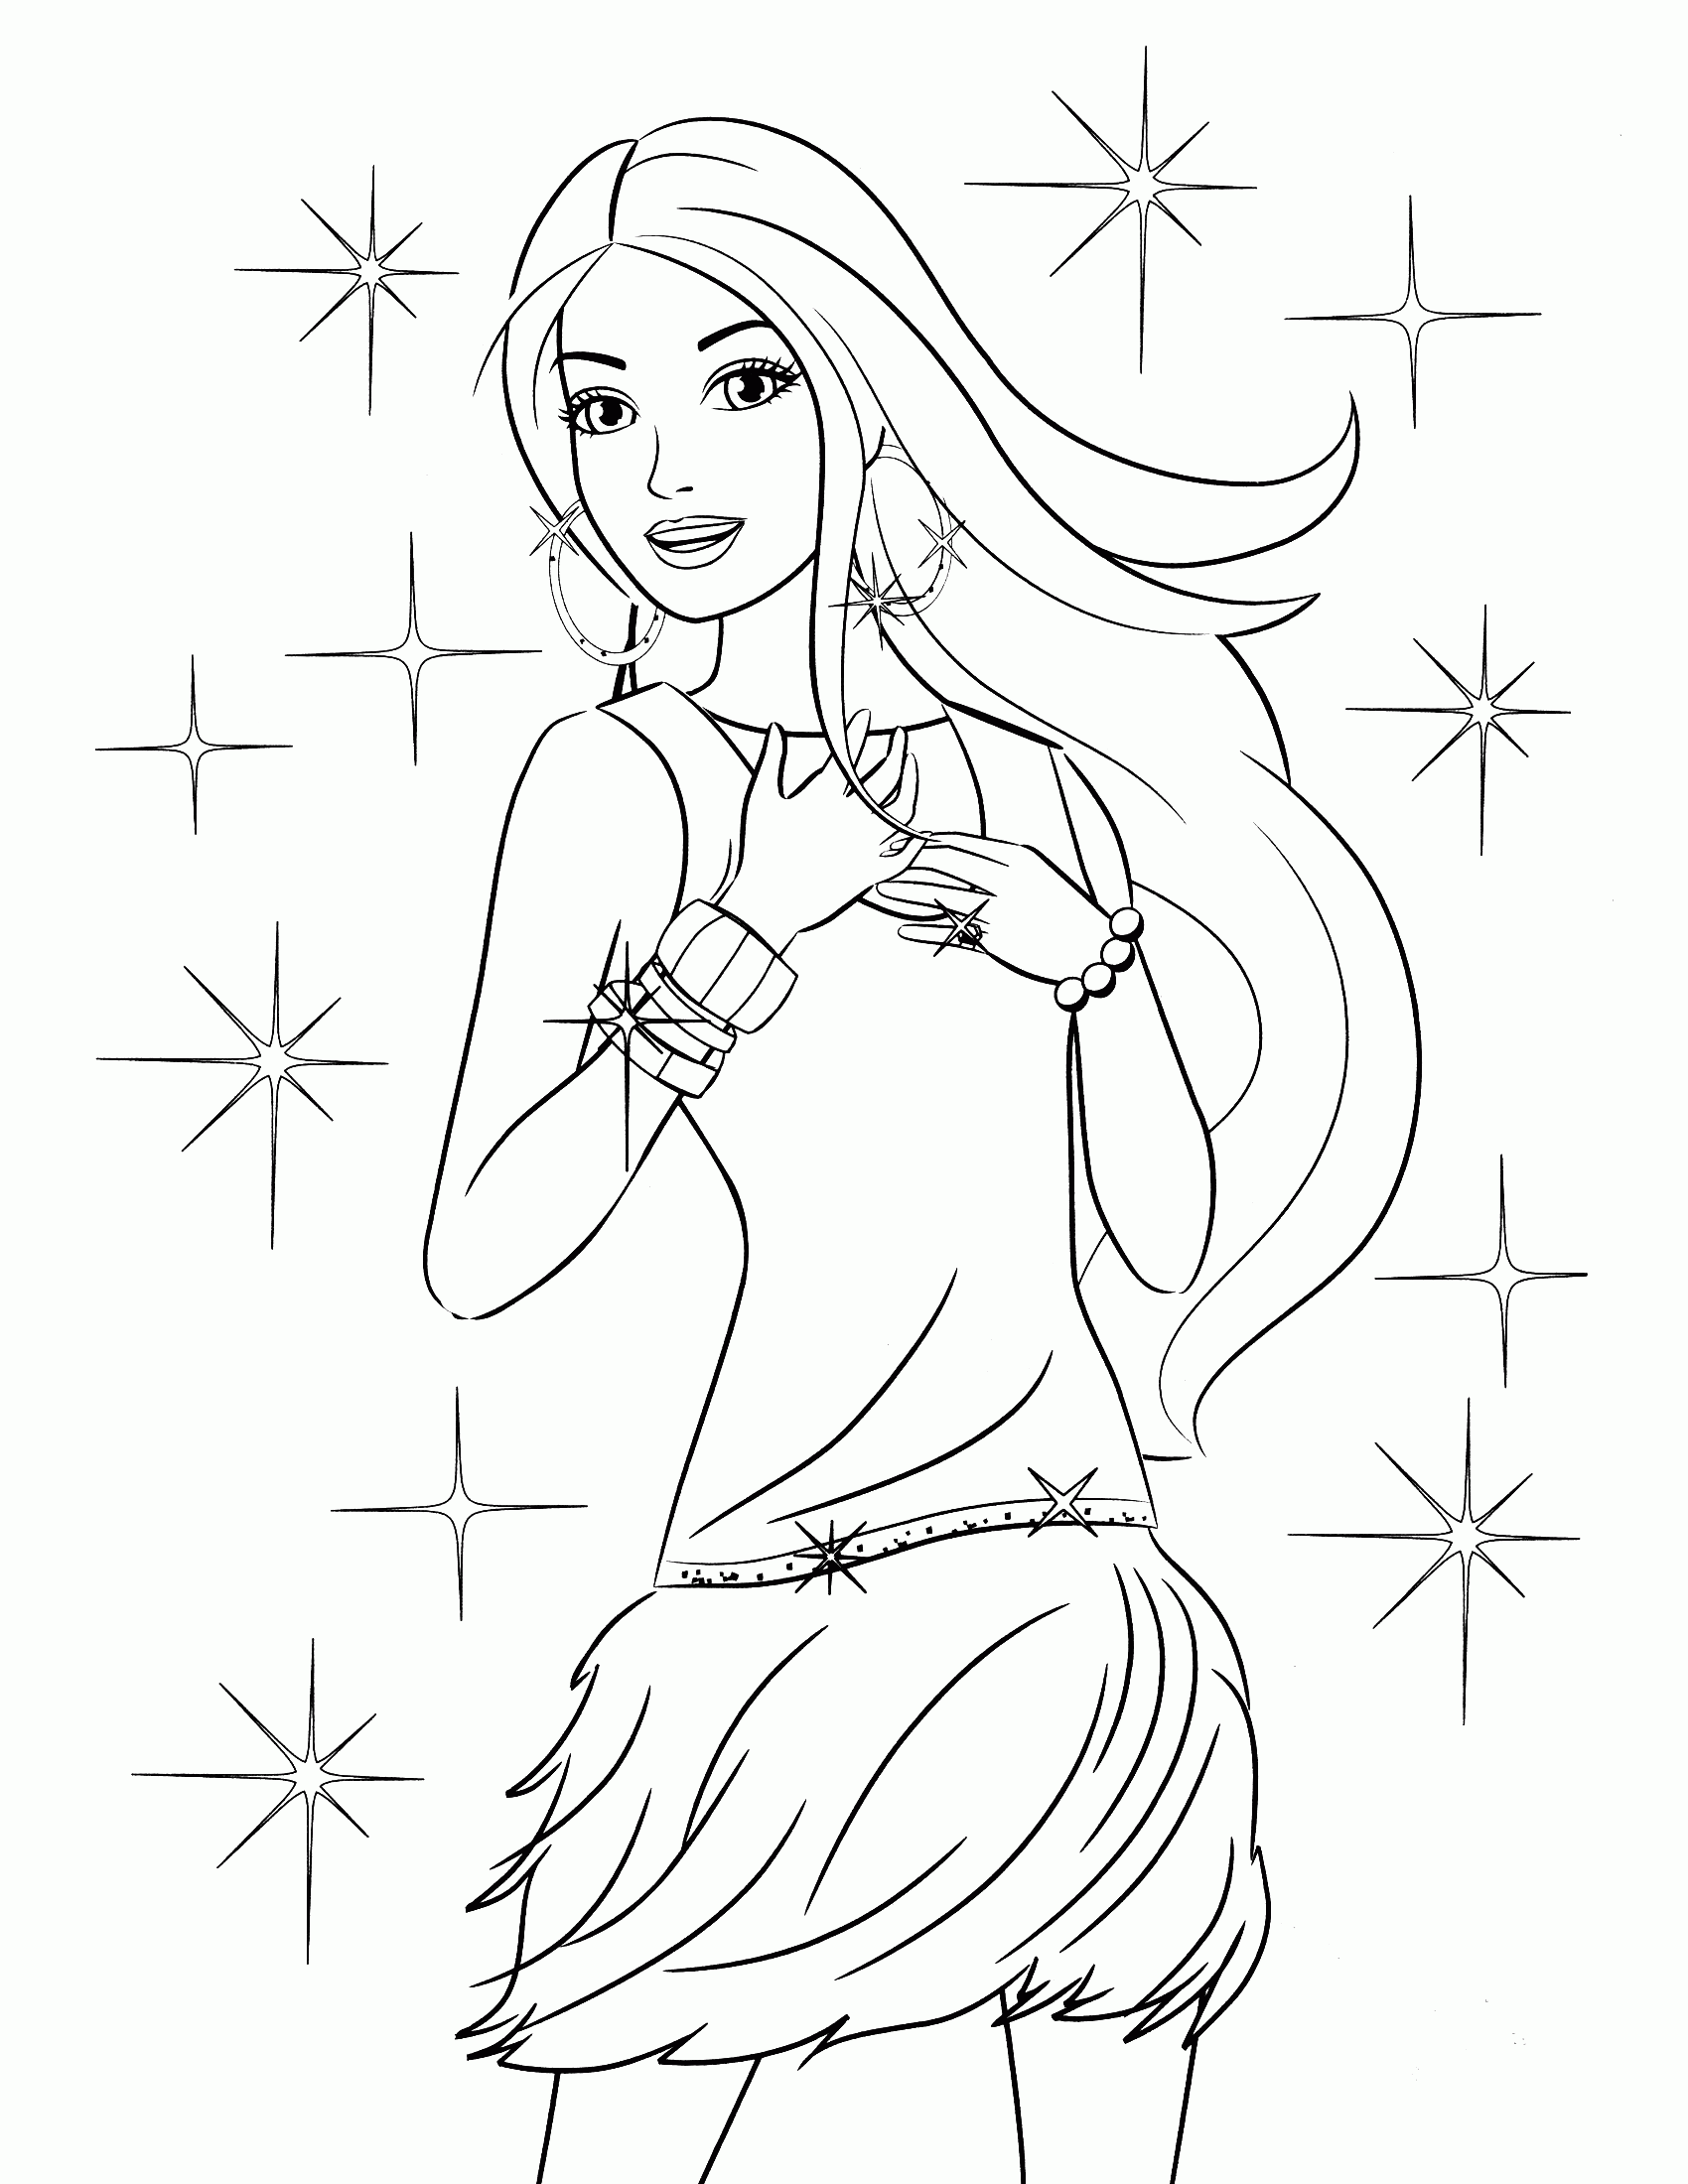 Ballerina Bunny Coloring Page - Coloring Pages For All Ages